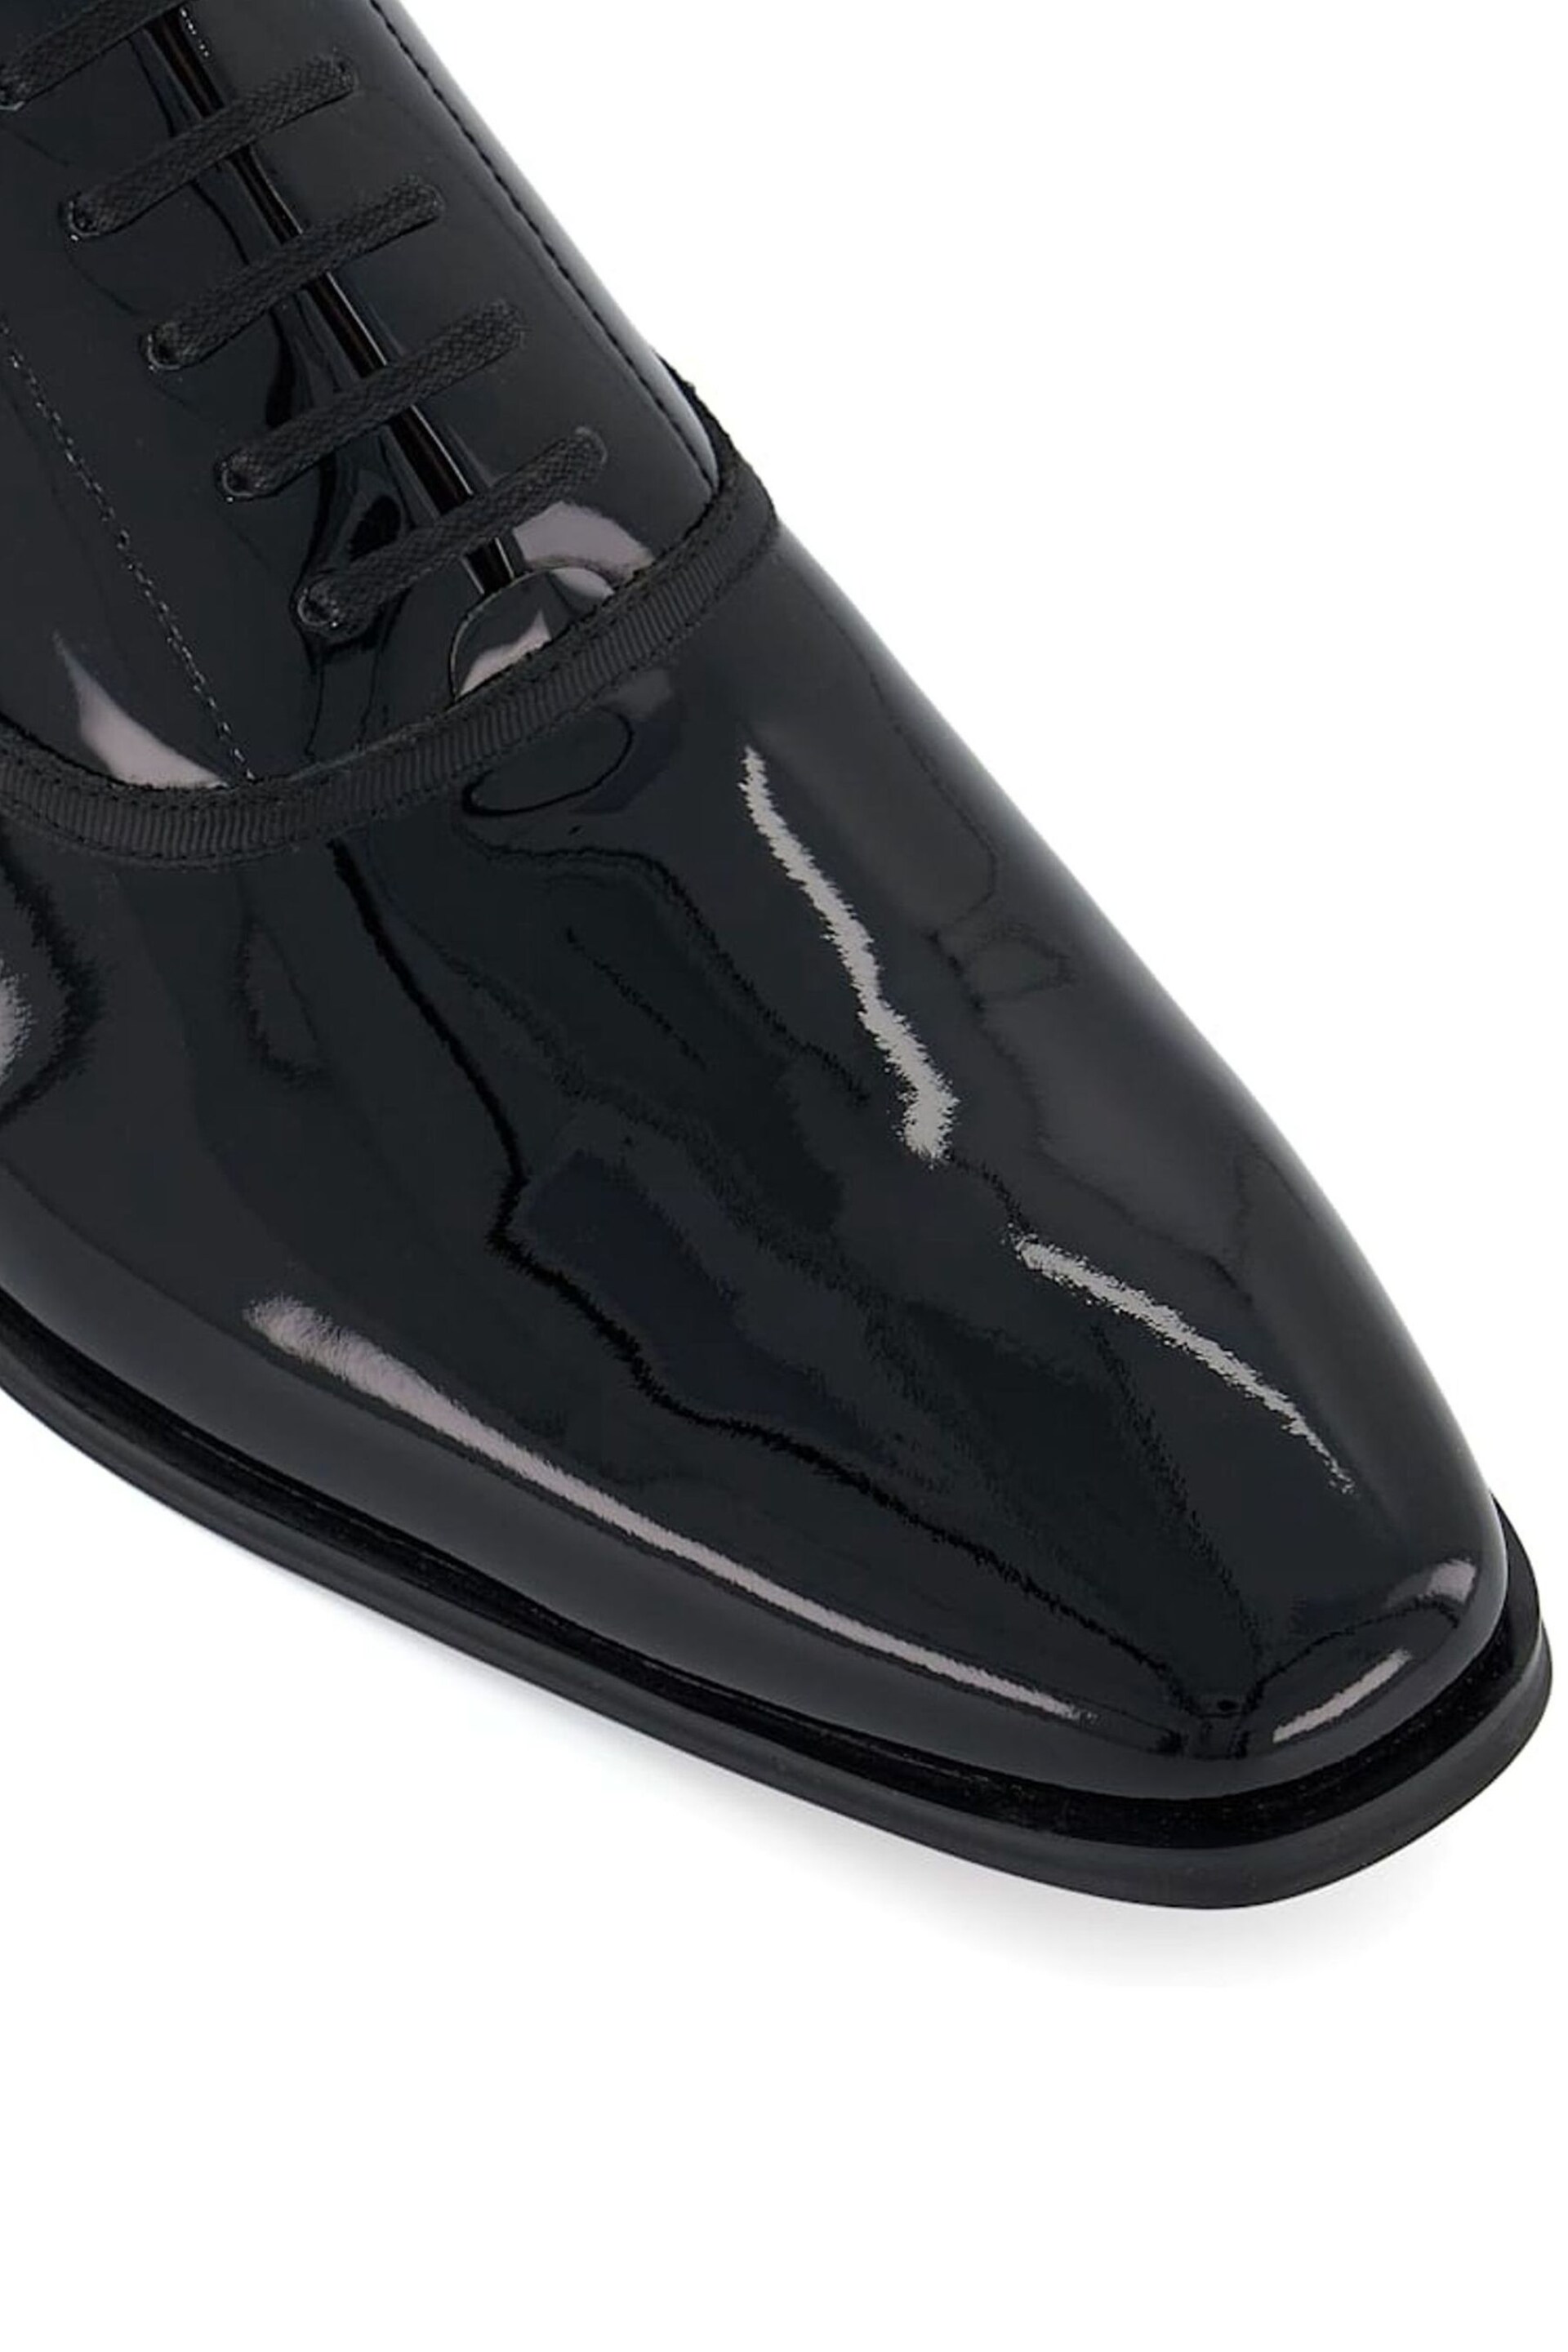 Dune London Black Wide Fit Swallow Patent Oxford Shoes - Image 5 of 6